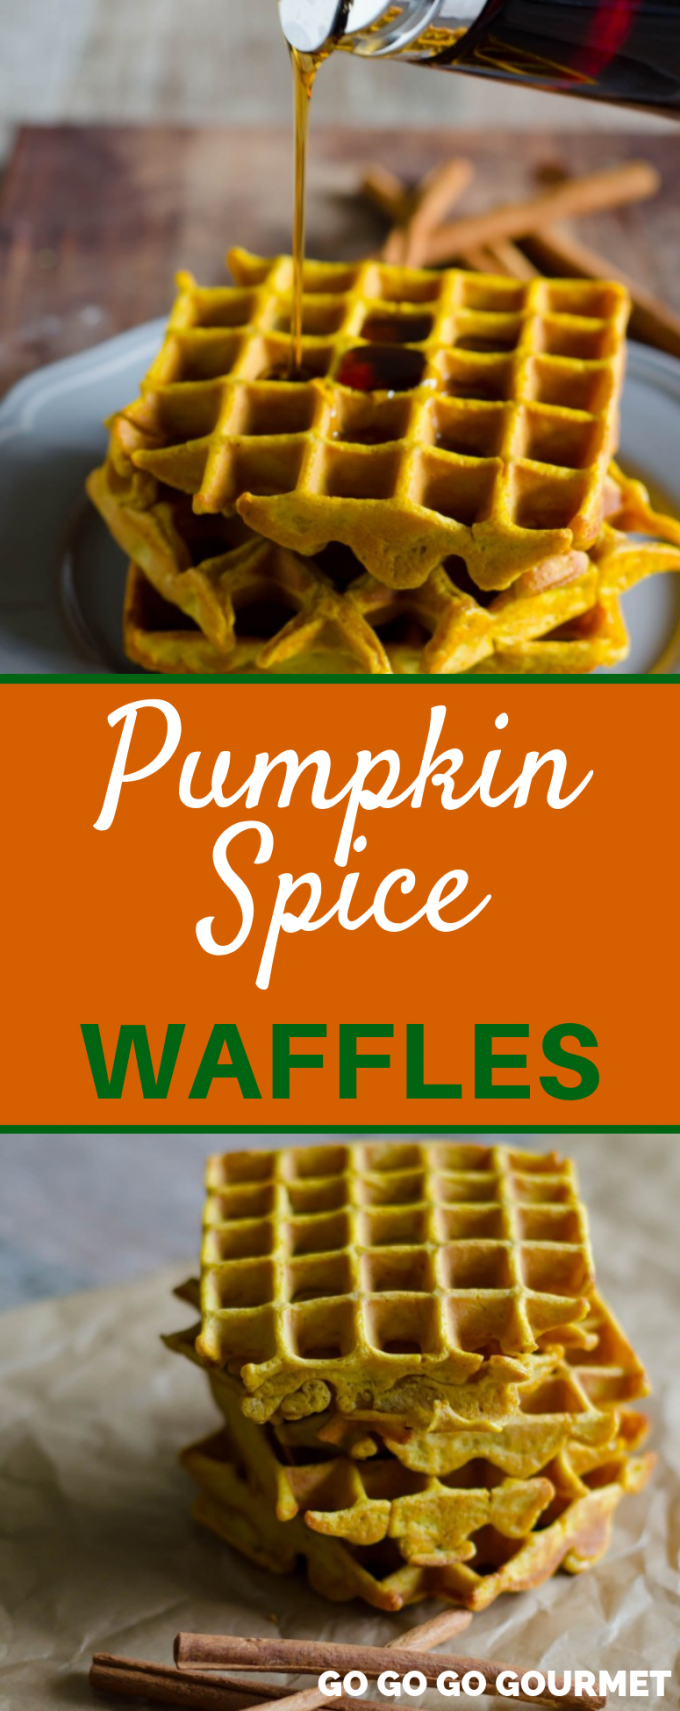 This easy Pumpkin Spice Waffles recipe is the best way to start fall mornings! Top with a healthy amount of maple syrup, and it might become your new favorite breakfast! #gogogogourmet #pumpkinspicewaffles #easypumpkinrecipes #fallbrunch via @gogogogourmet